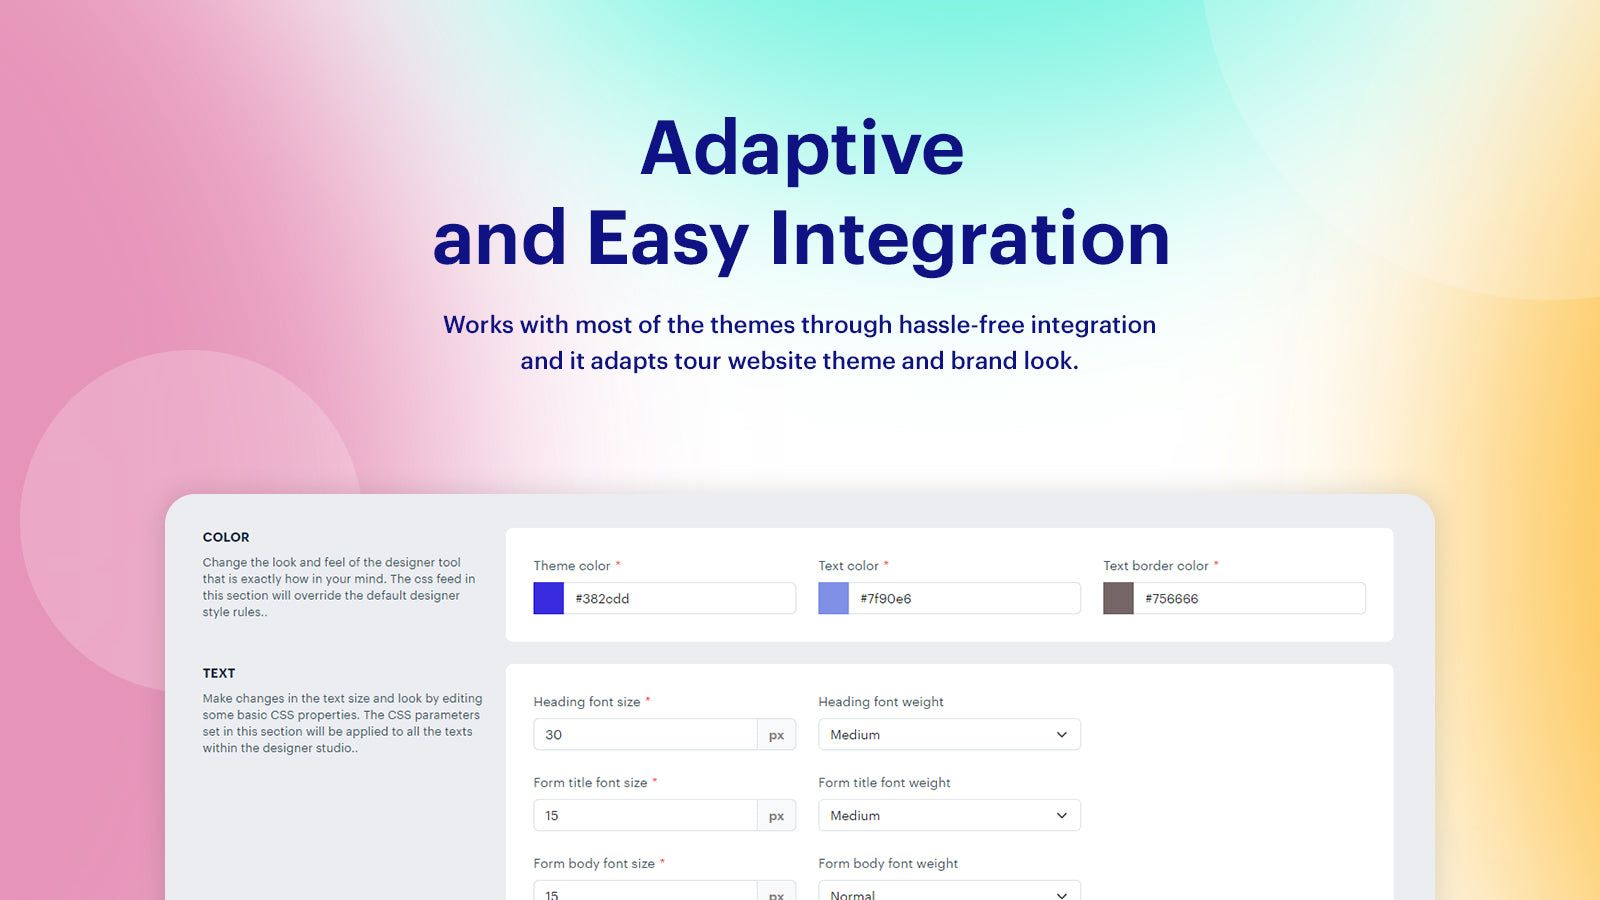 Adaptive and Easy Integration